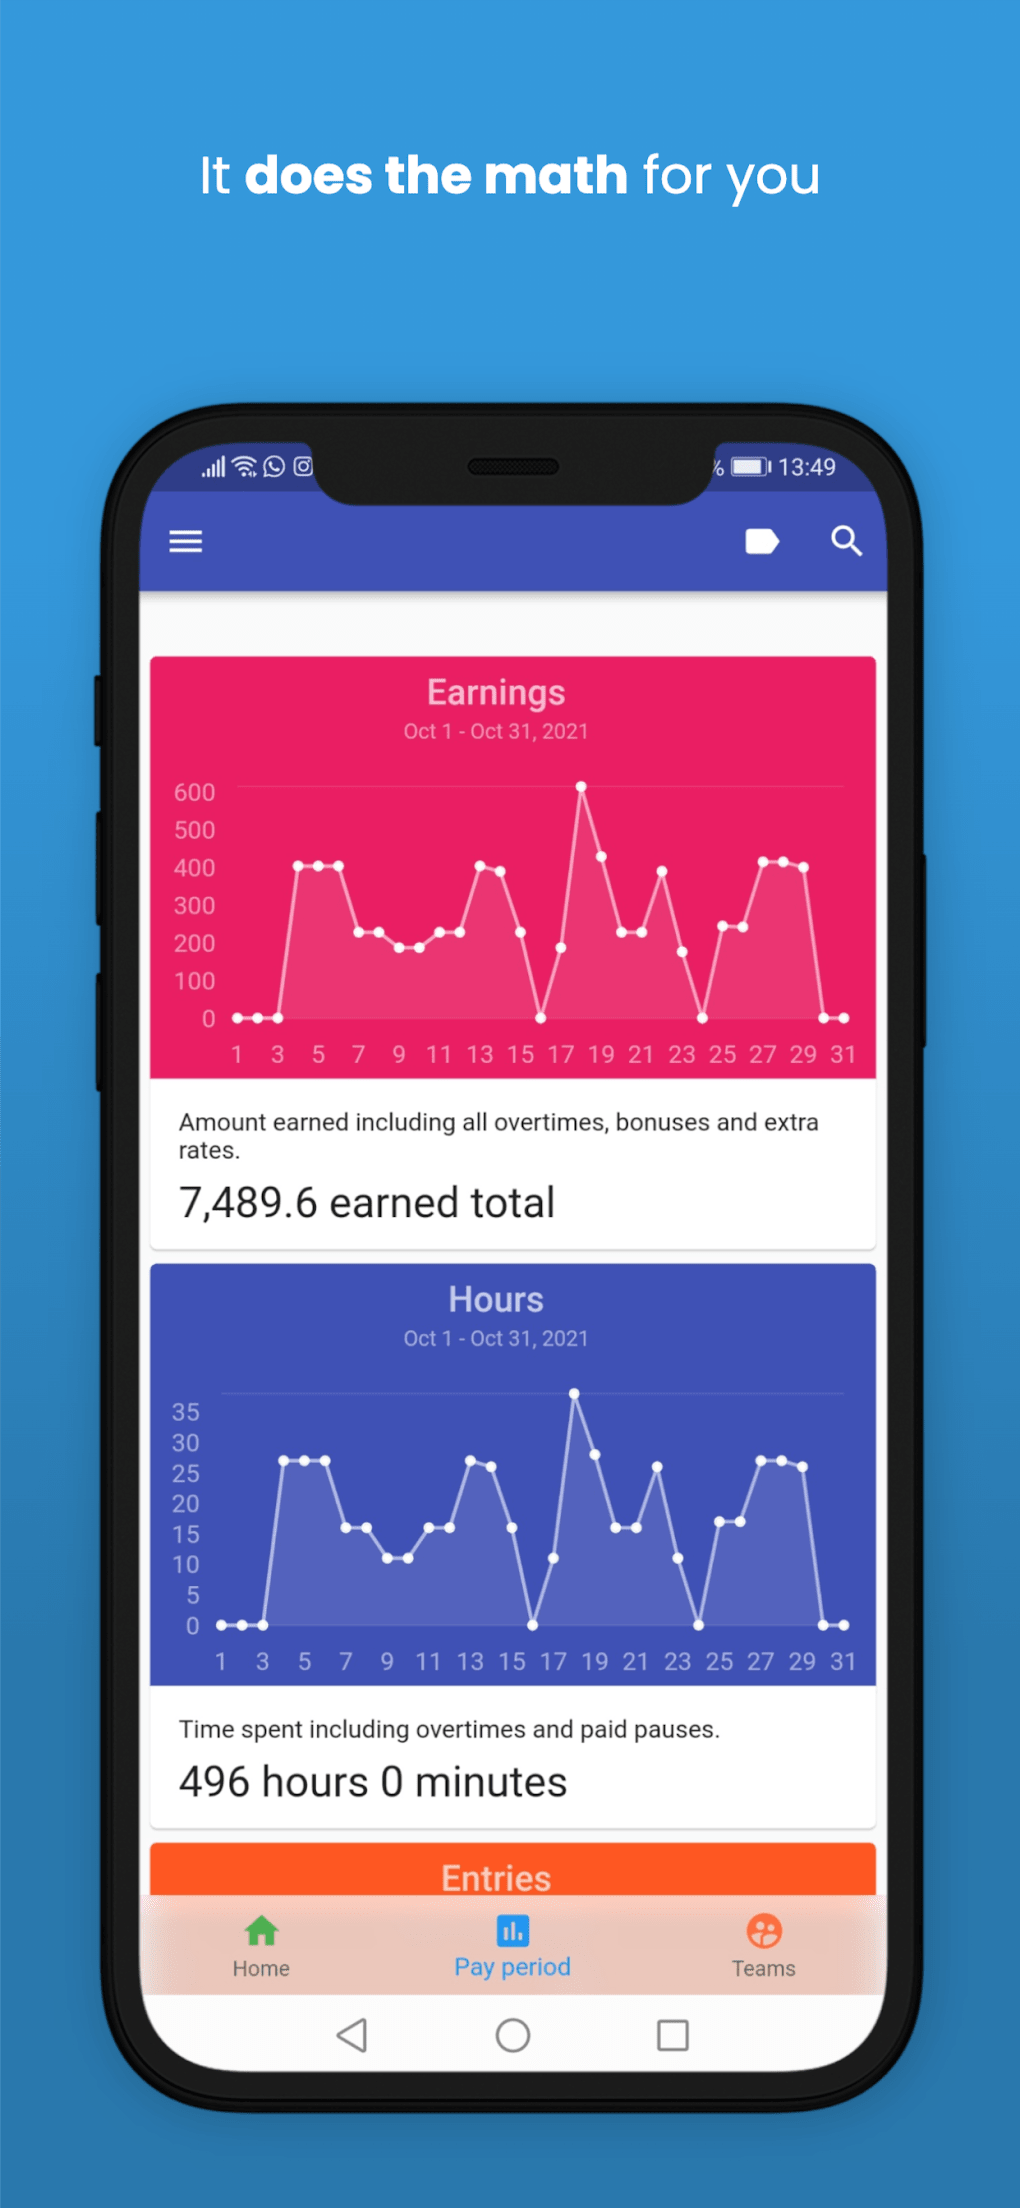 timesheet-work-hours-tracker-for-android-download